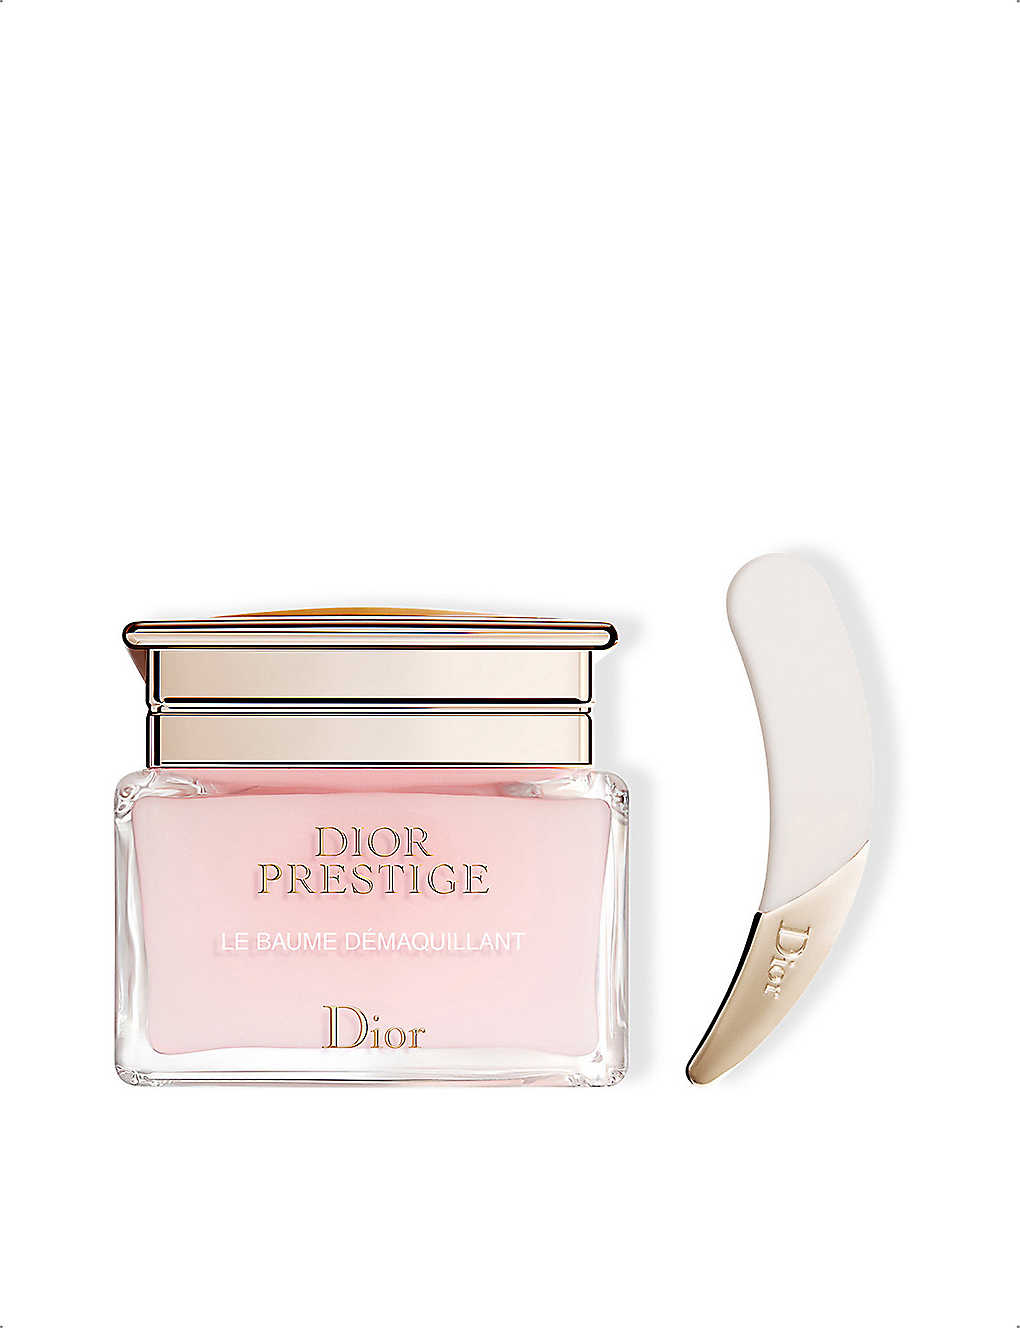 Dior Prestige Le Baume Démaquillant Cleansing Balm-to-oil